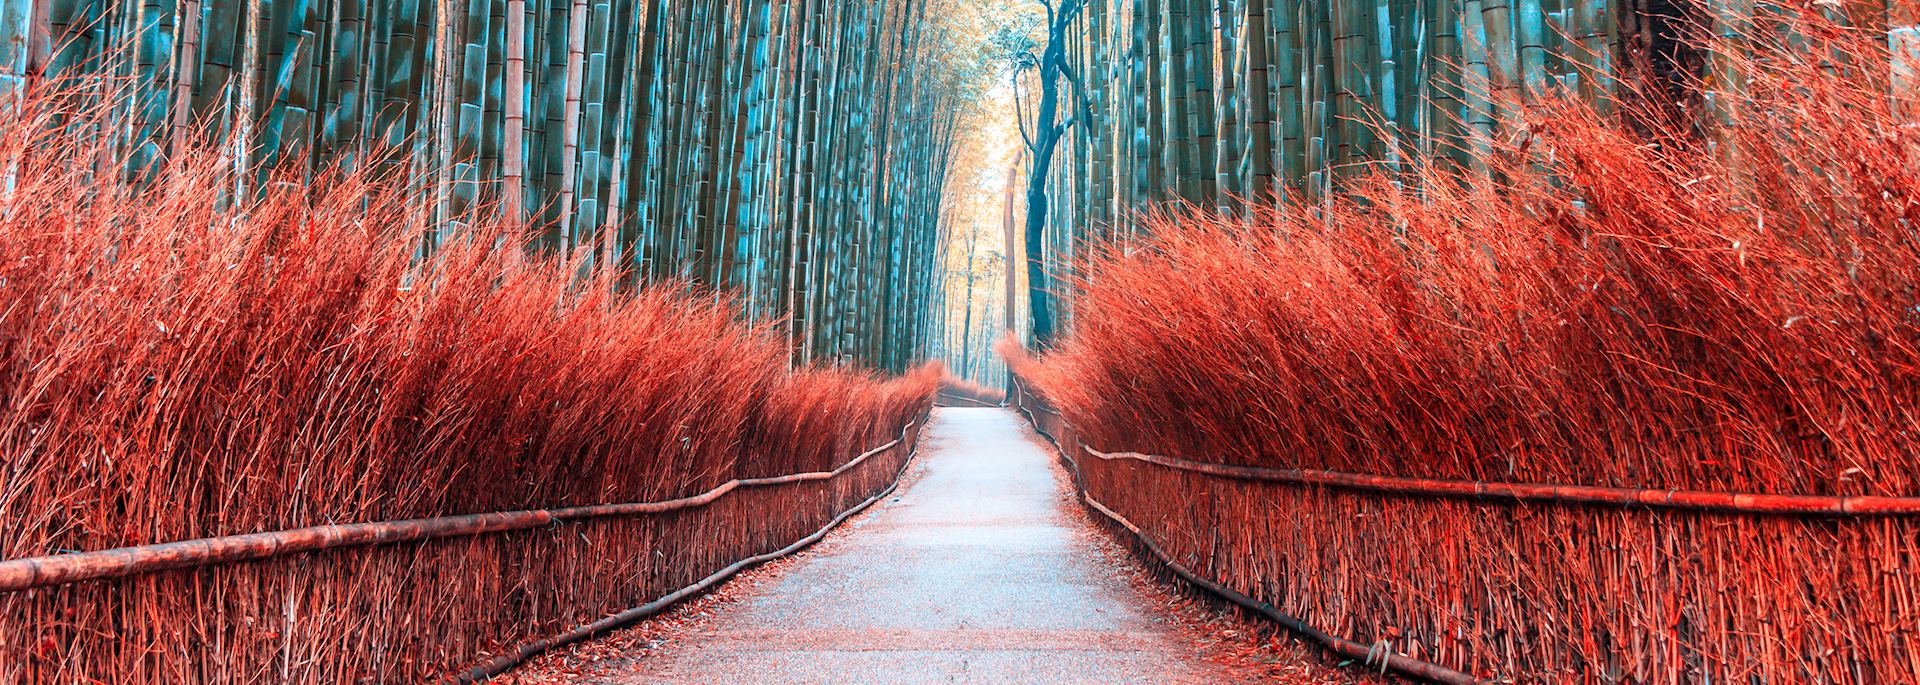 Bamboo forest Kyoto